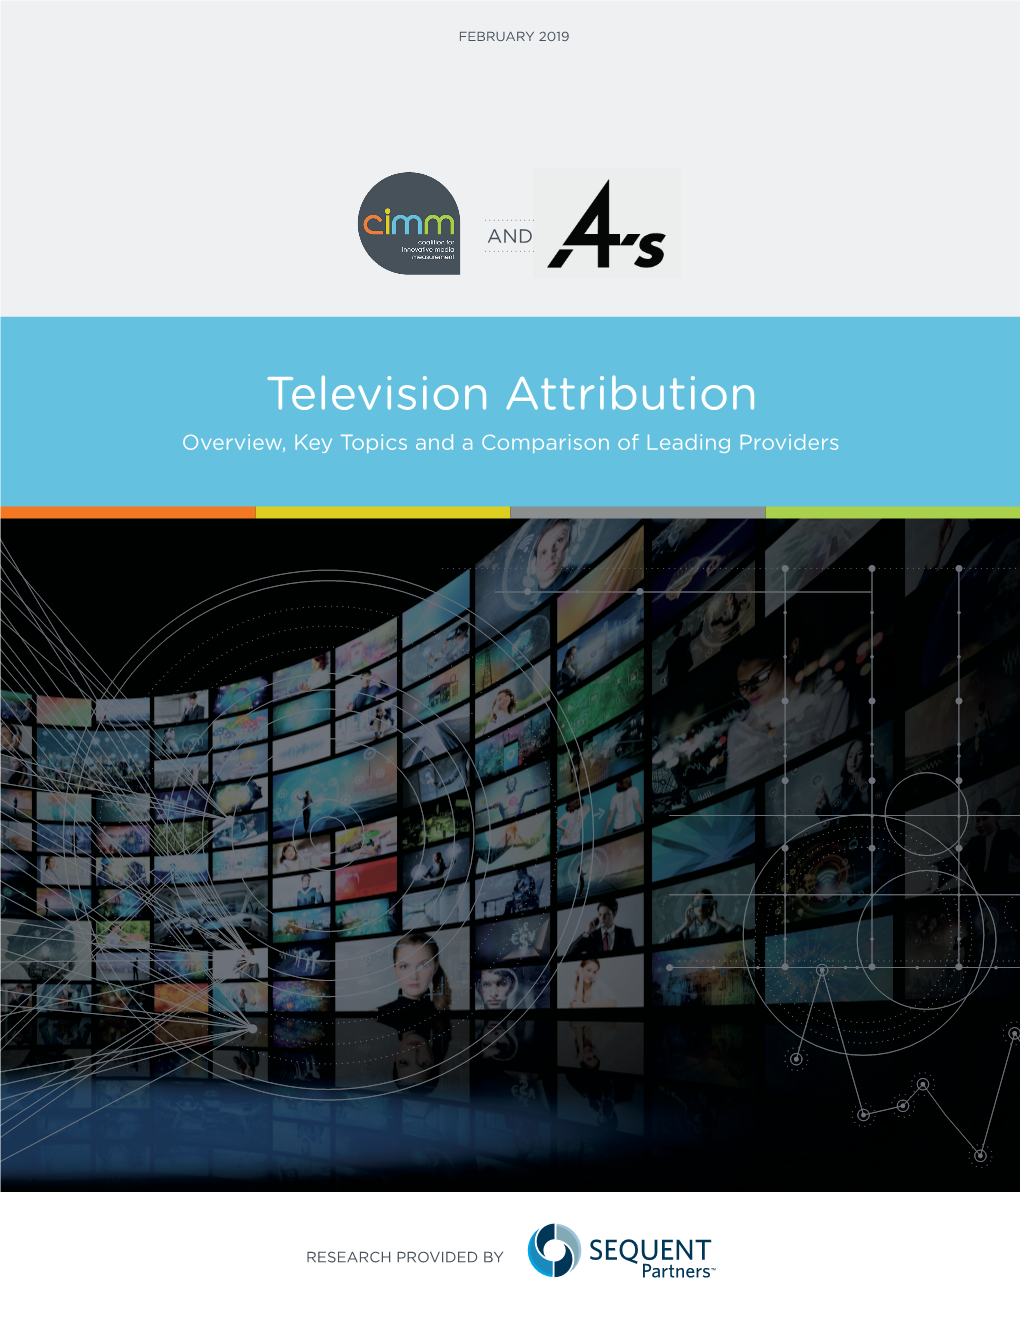 Television Attribution Overview, Key Topics and a Comparison of Leading Providers